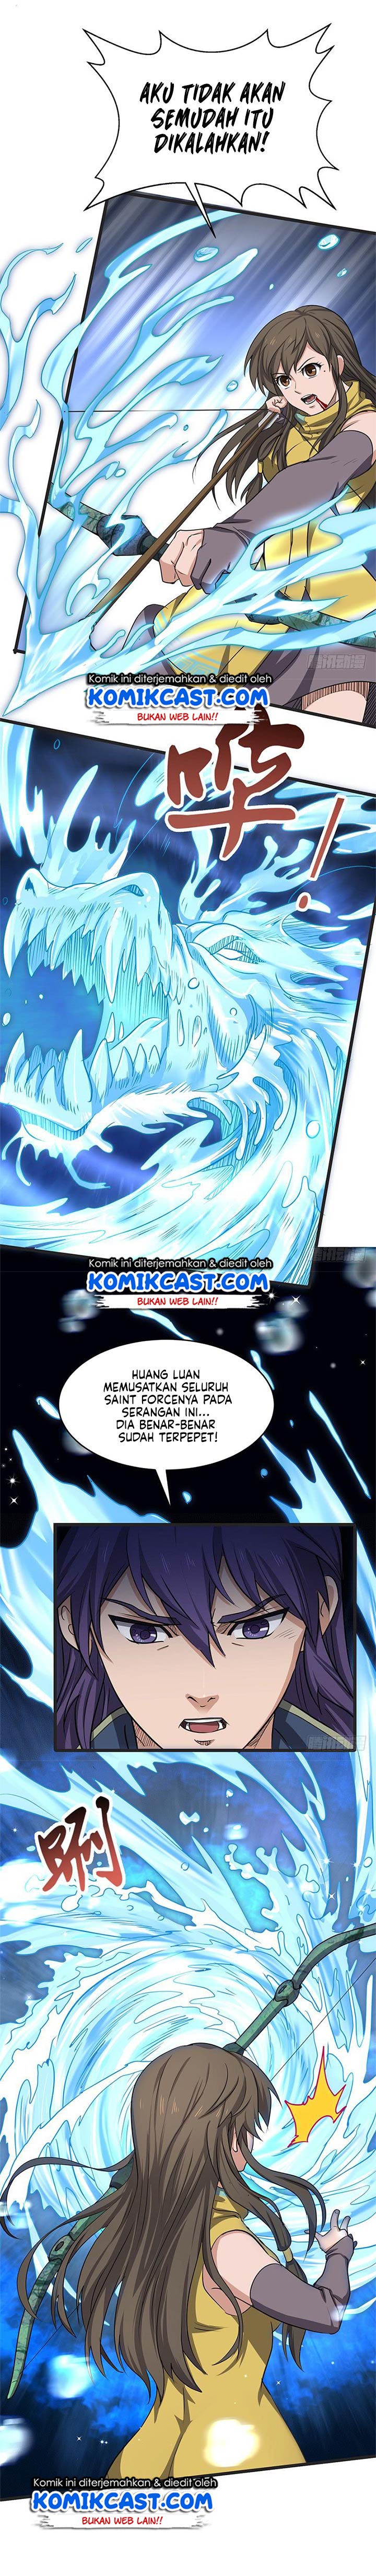 Chaotic Sword God Chapter 171